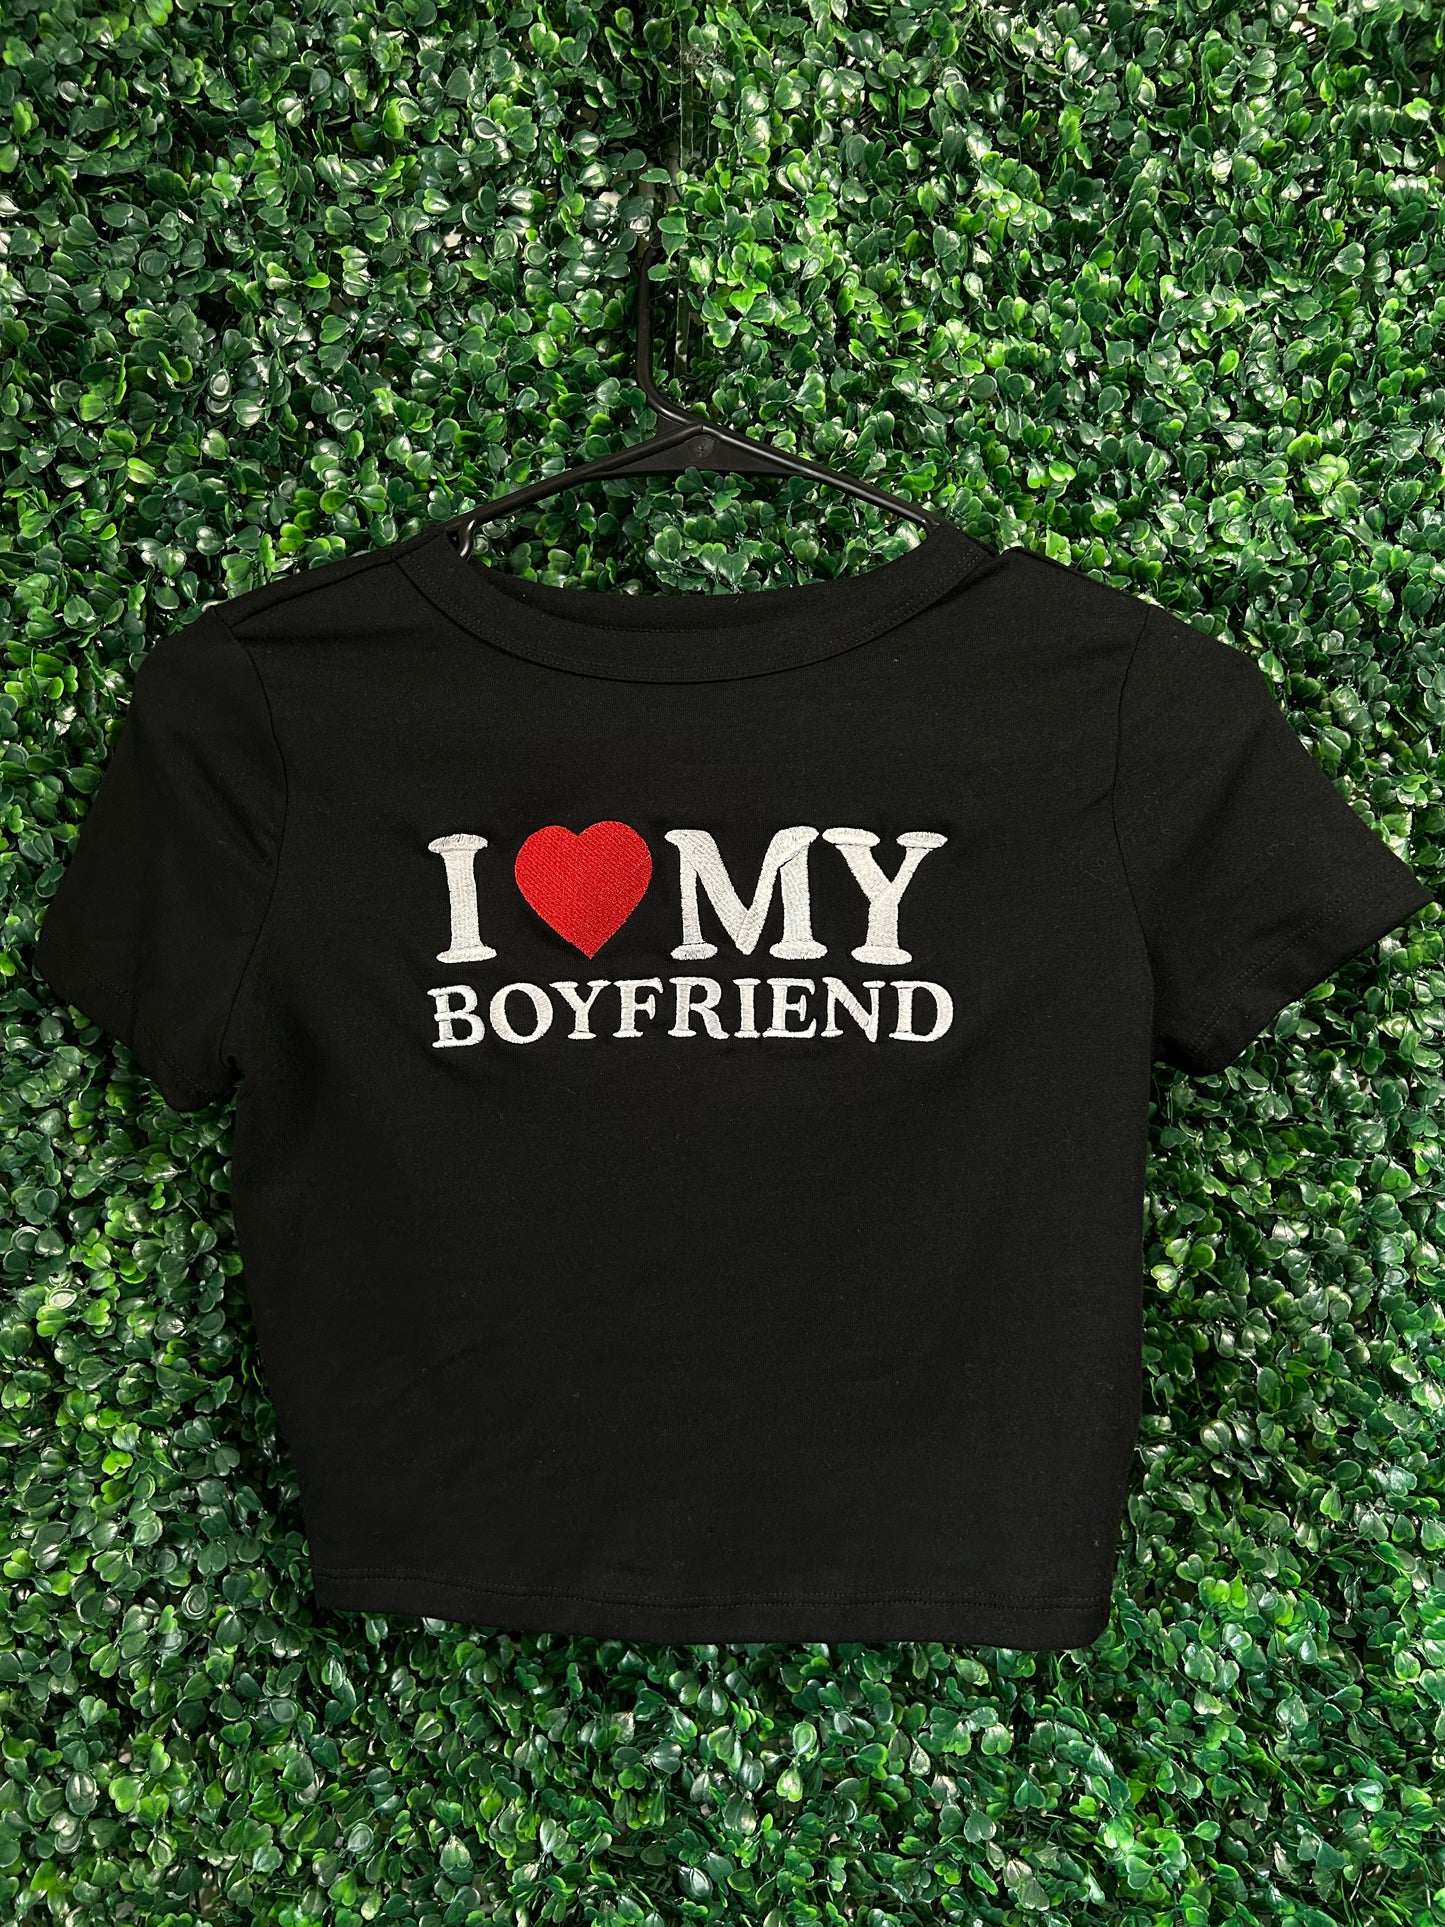 Embroidered ‘I Heart My Boyfriend’ Cropped, Short Sleeve, Petite fit, Adult, Female, T-Shirt